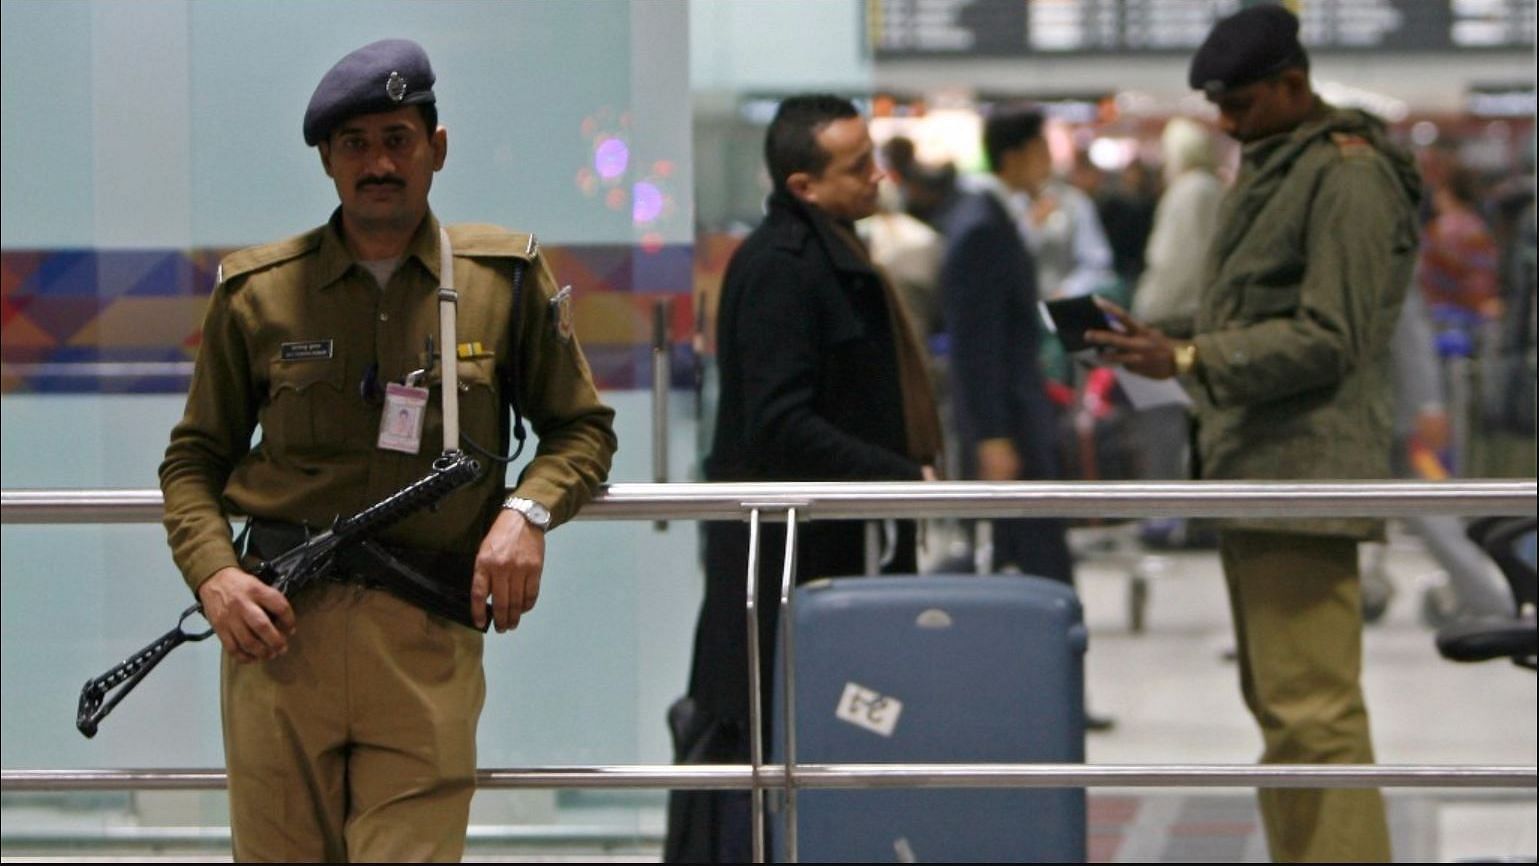 Security check at an Indian airport. Photo used for representation.